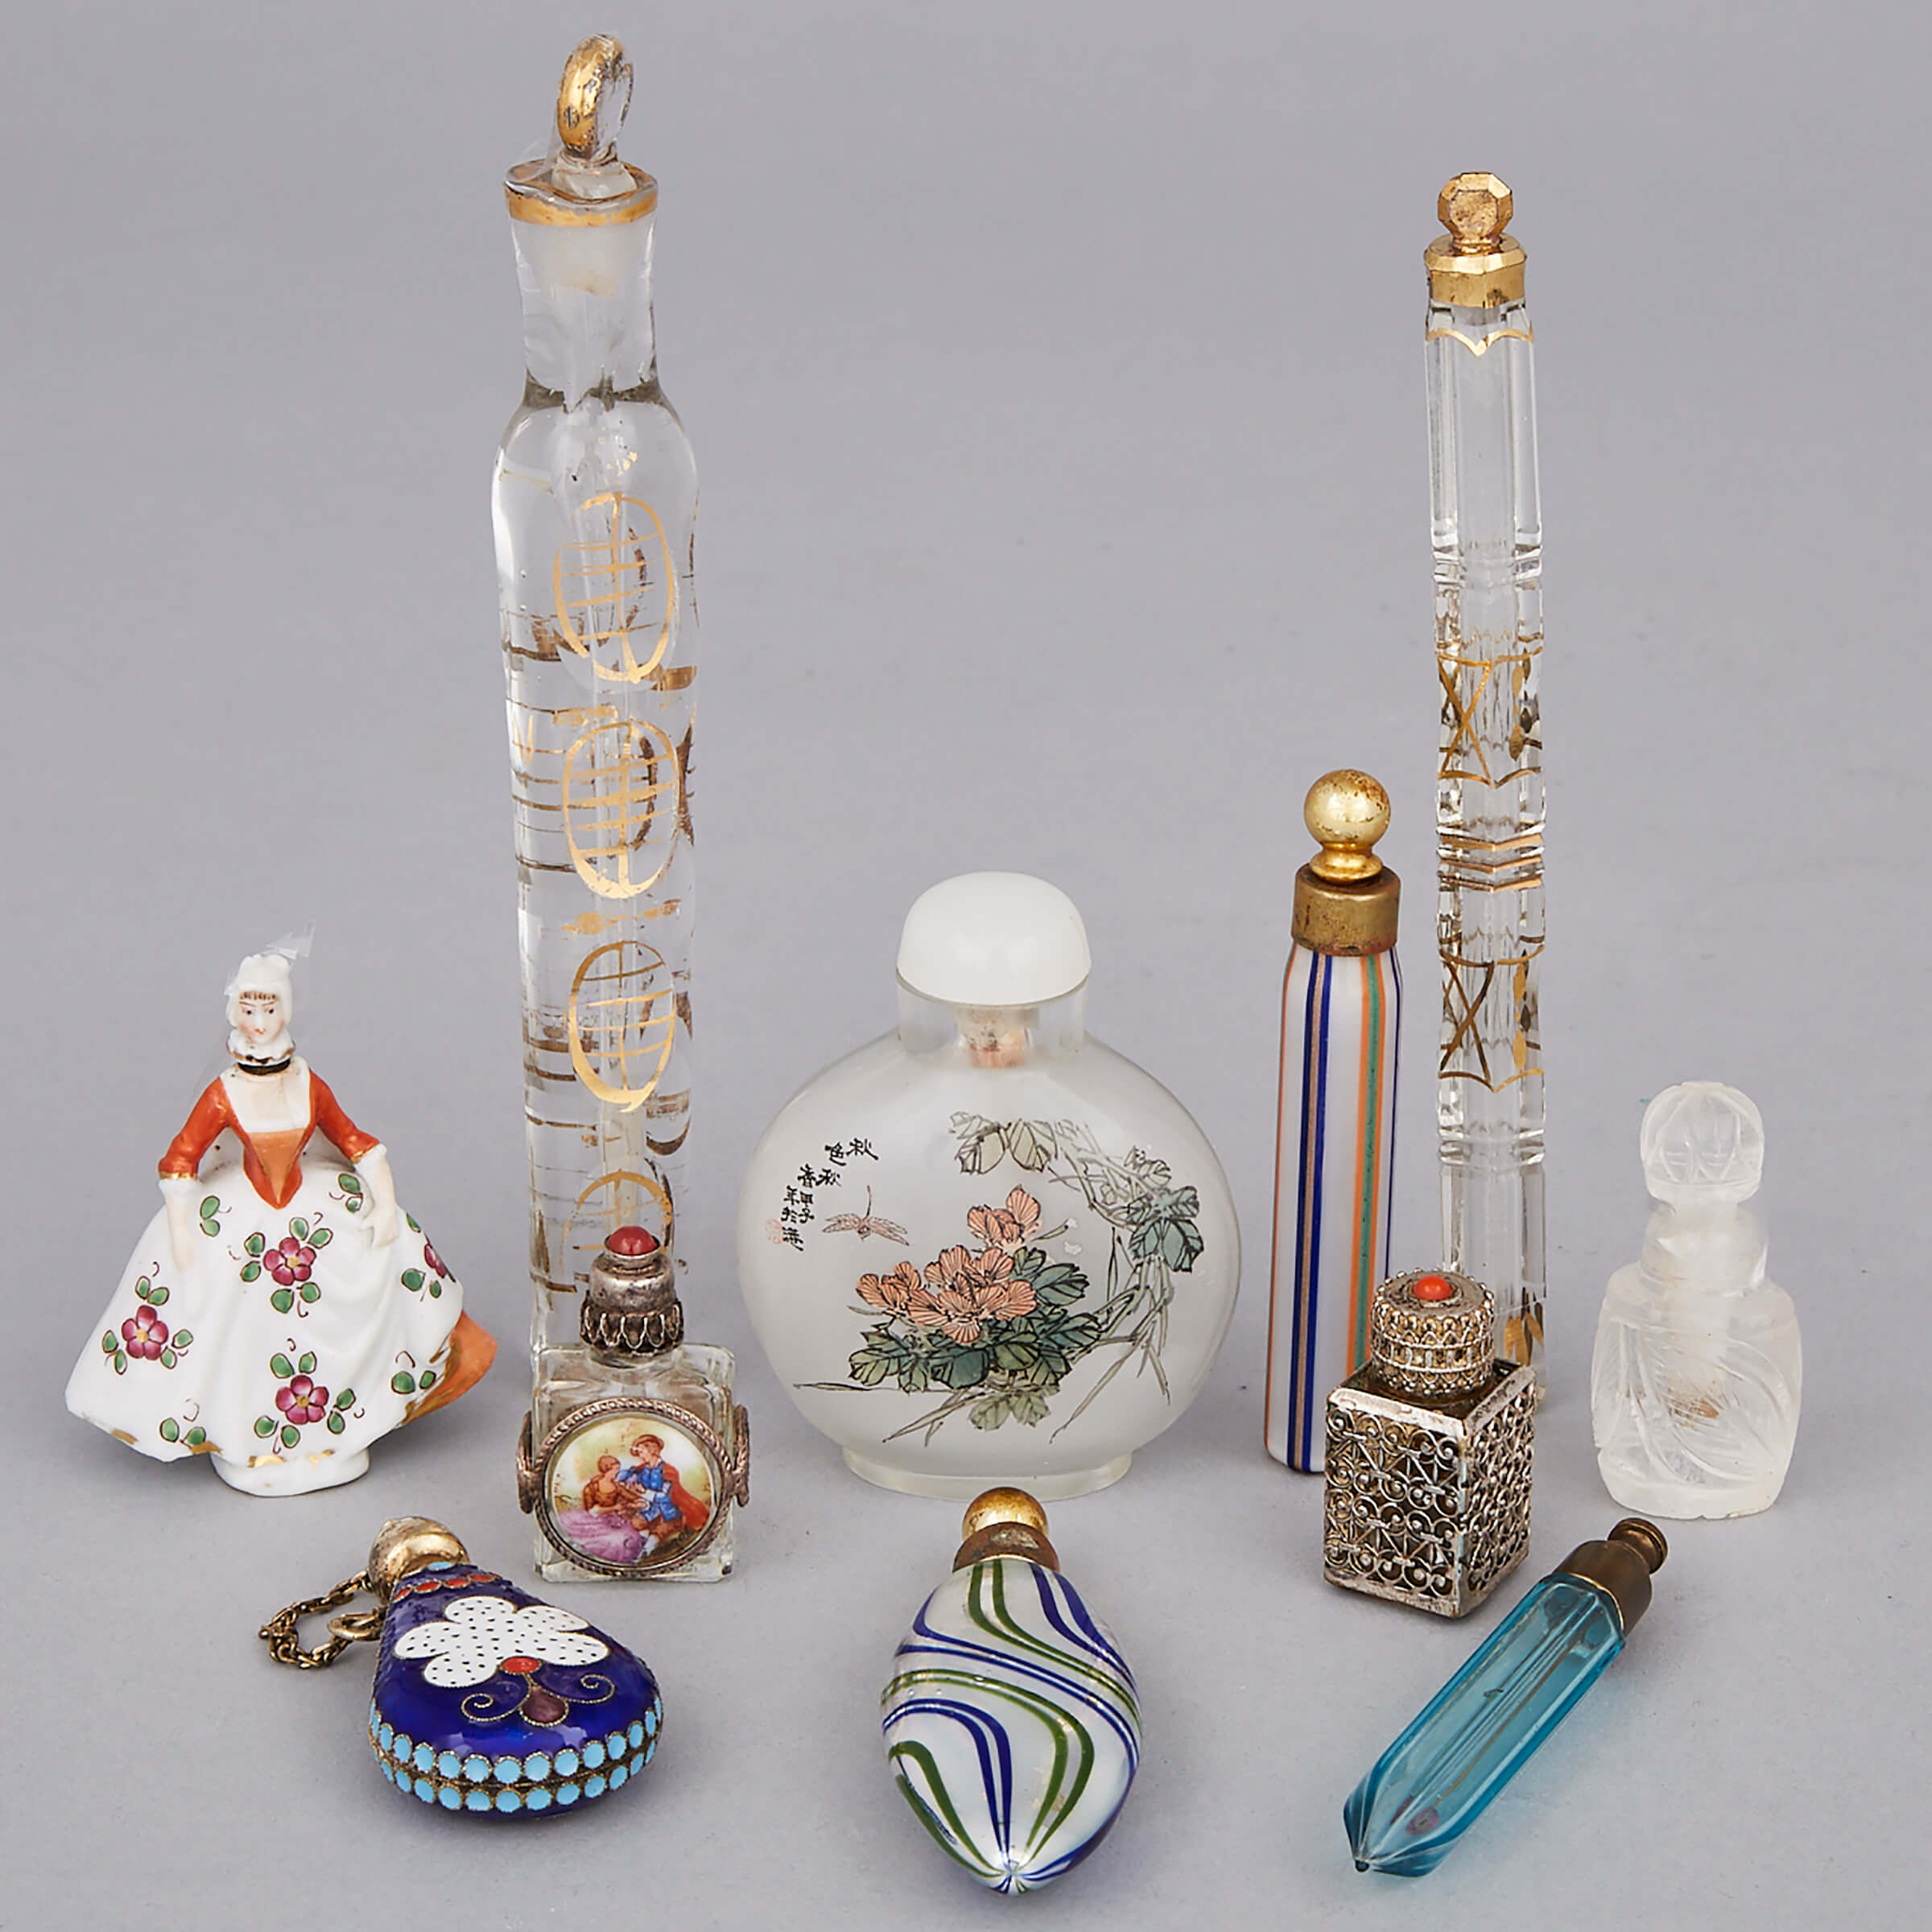 Eleven Various Perfume Bottles and Phials, late 19th century